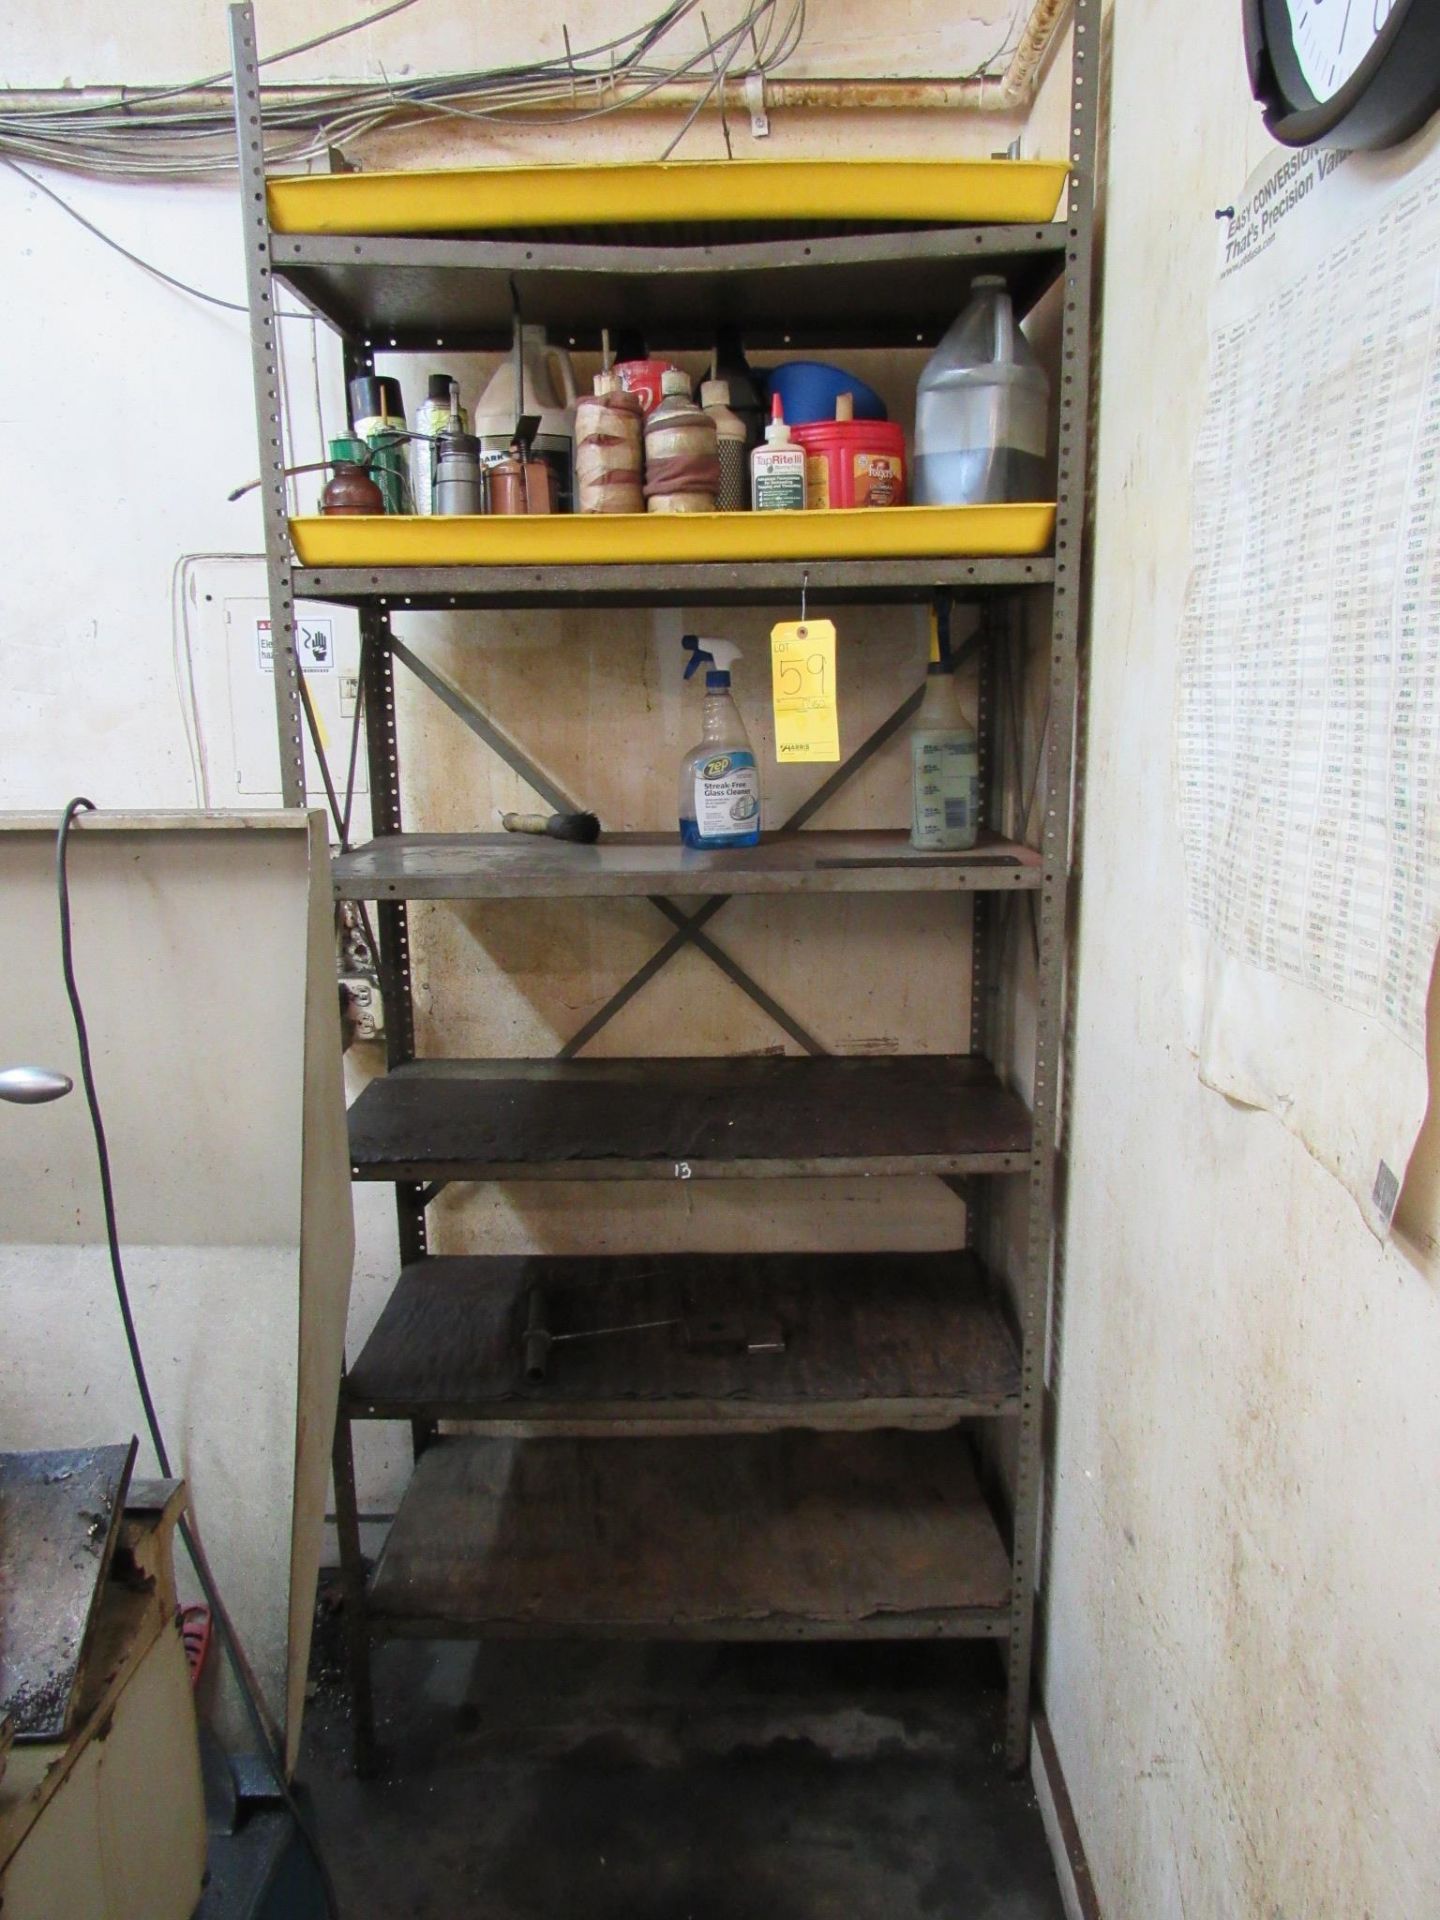 SHELF WITH ASST. LUBRICANTS